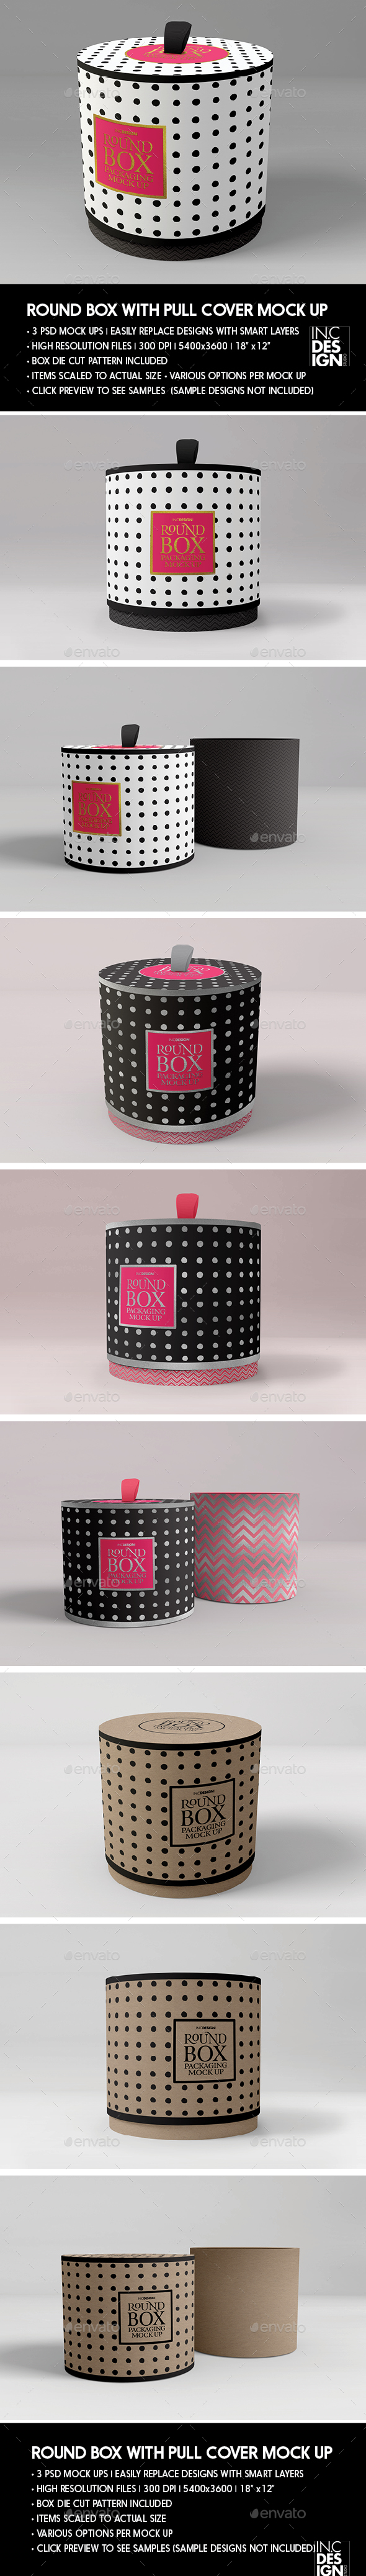 Packaging Mock Up Round Box with Pull up Cover